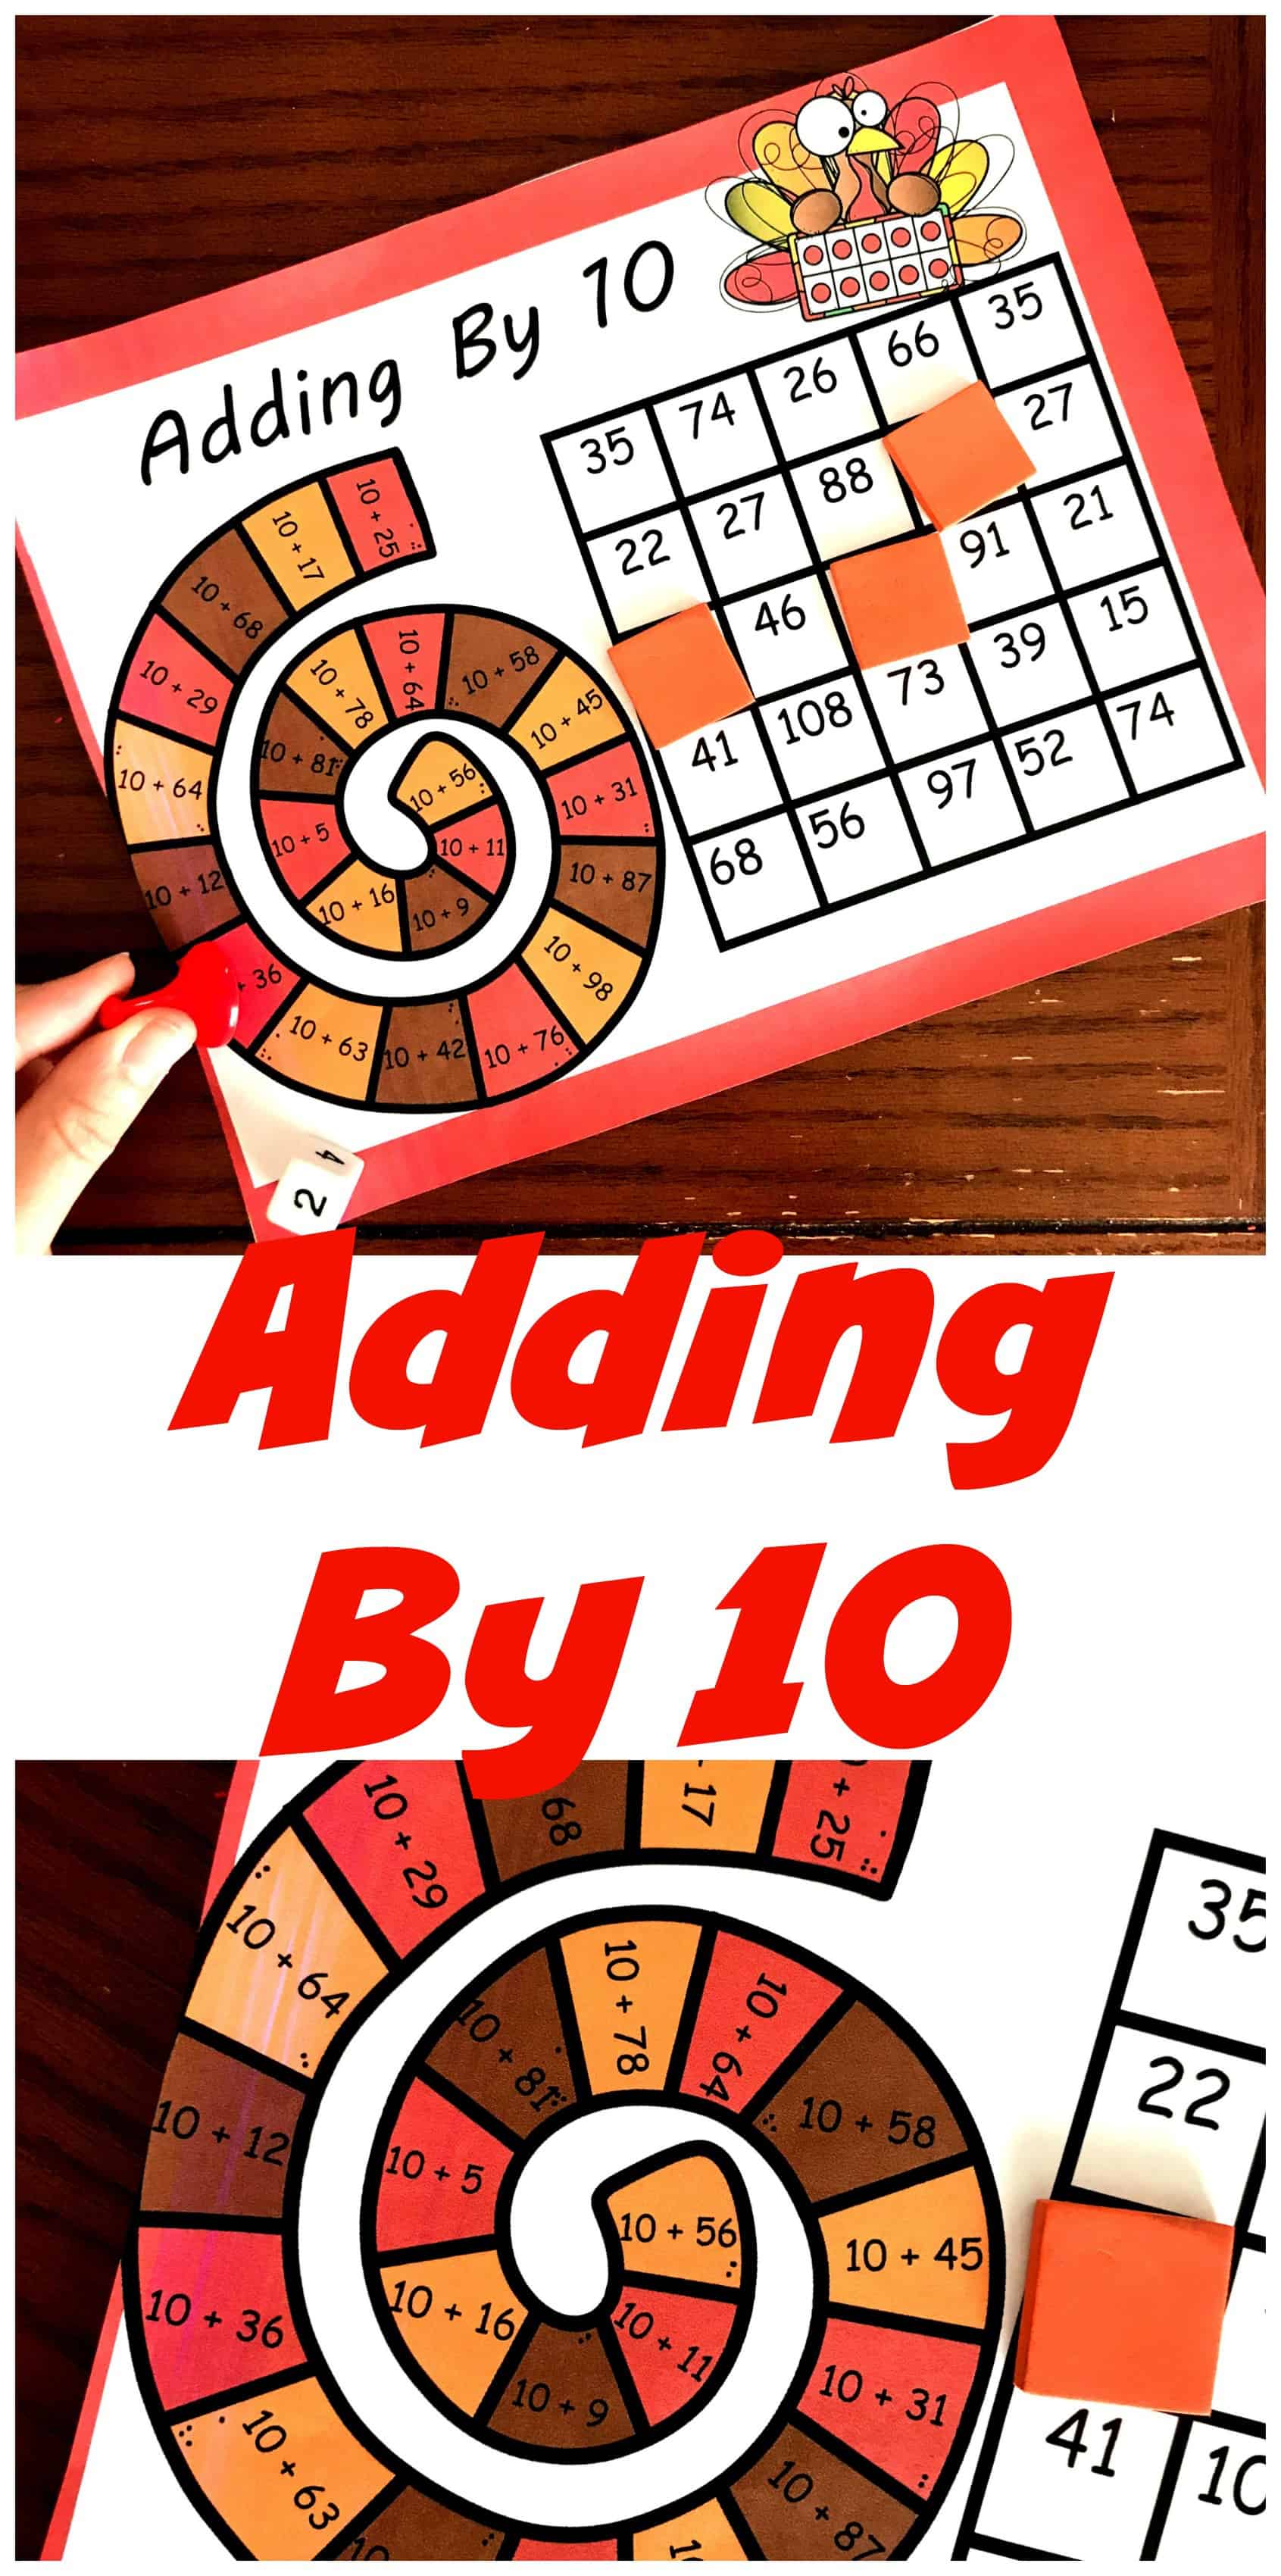 Adding by 10 game with paper covering numbers.